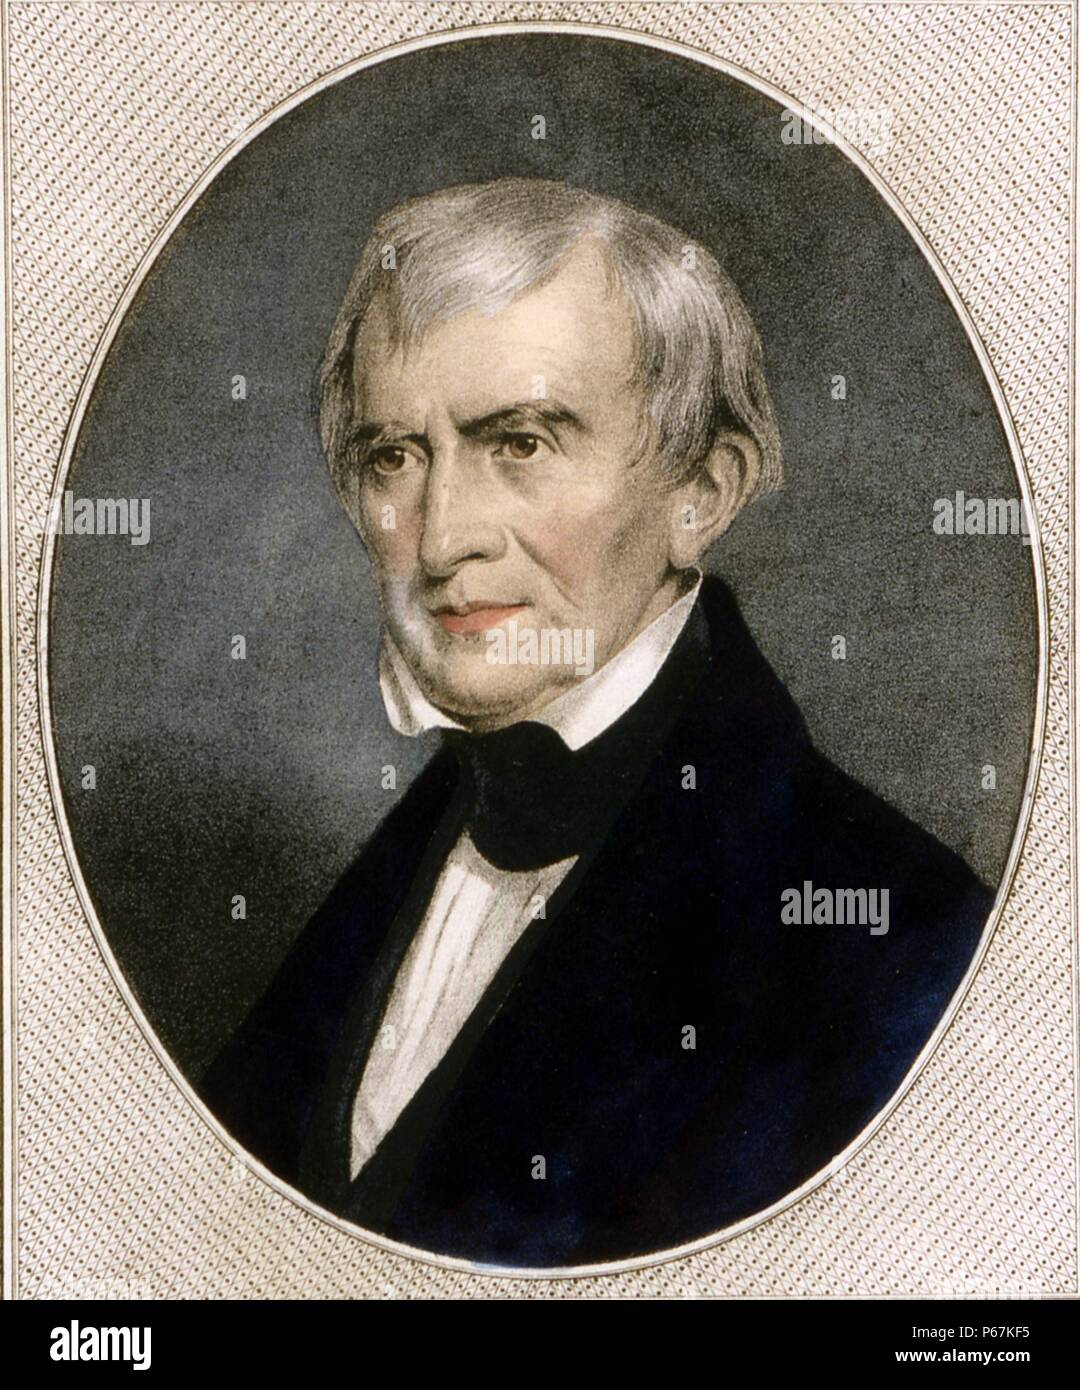 President William Harrison. Harrison was the ninth President of the United States, an American military officer and politician, and the first president to die in office. Stock Photo